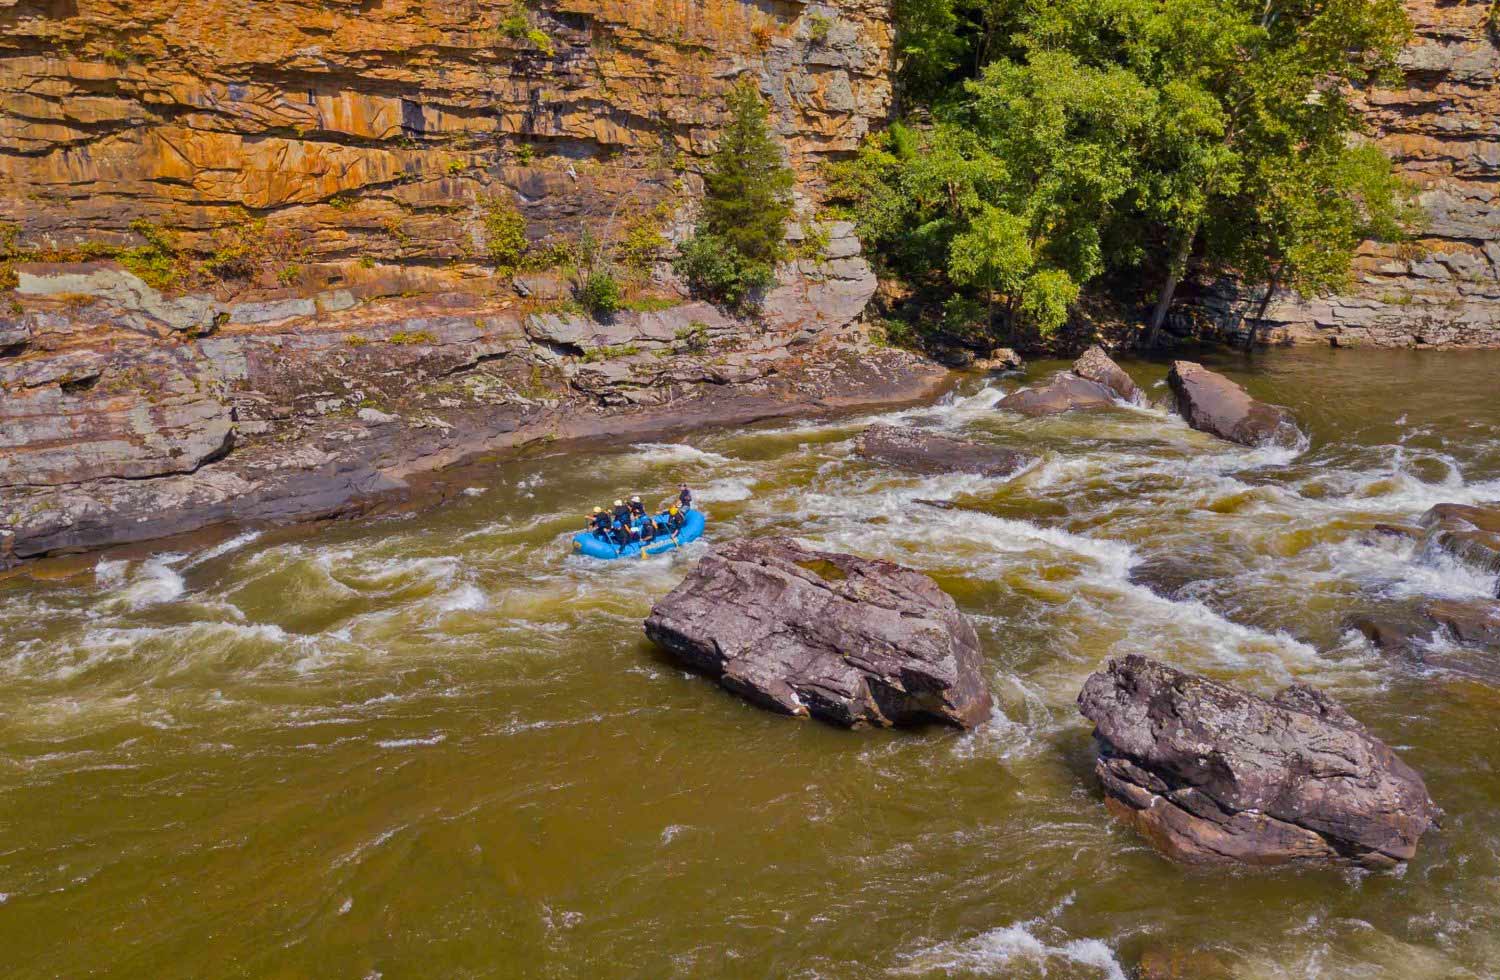 A lower gauley river rafting trip passes the cliffs of canyon doors rapid.